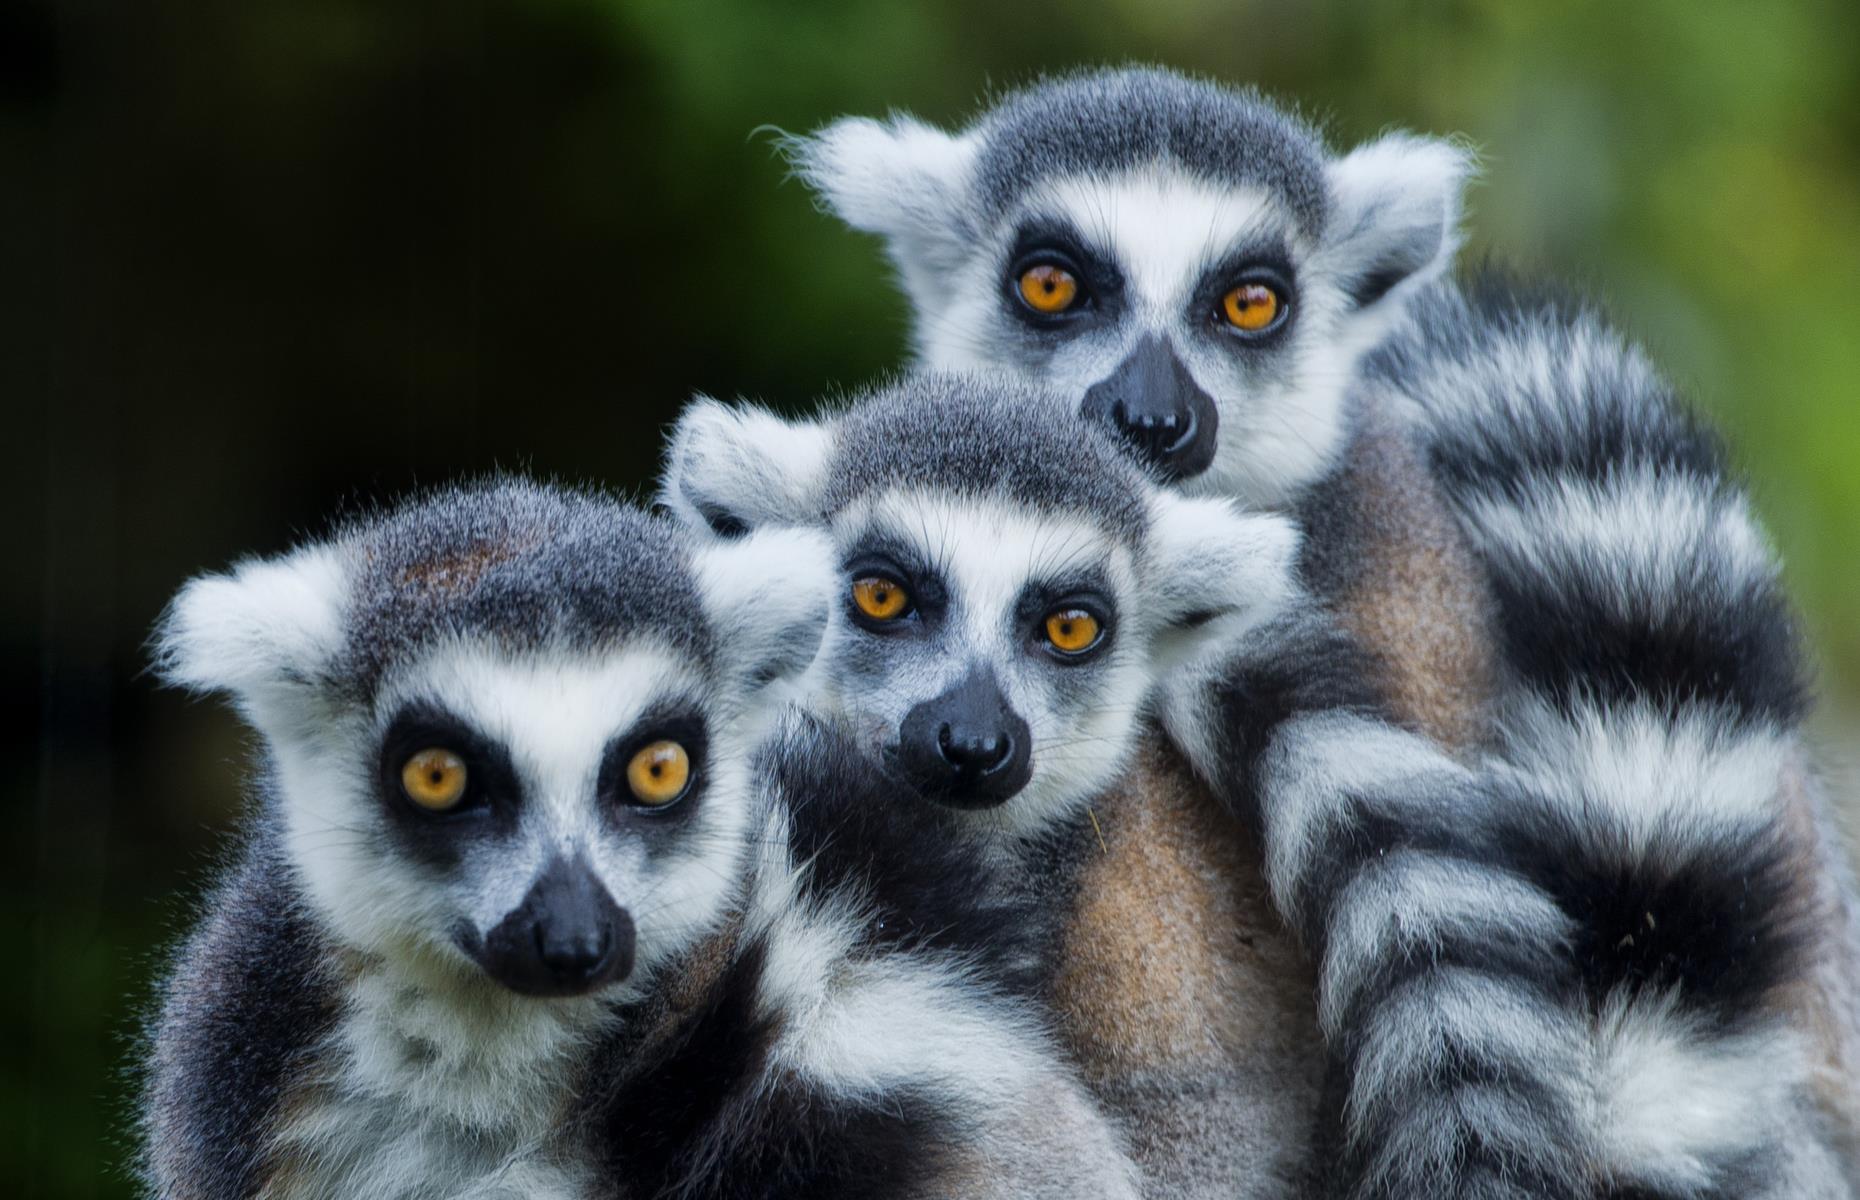 Explore biodiverse Madagascar – a sun-baked island nation off the coast of southeast Africa – and you’ll be in close contact with its indigenous wildlife. An incredible 5% of all known plant and animal species can be found here and its rainforests and deserts are home to rare reptiles, towering baobab trees and over one hundred species of lemur.